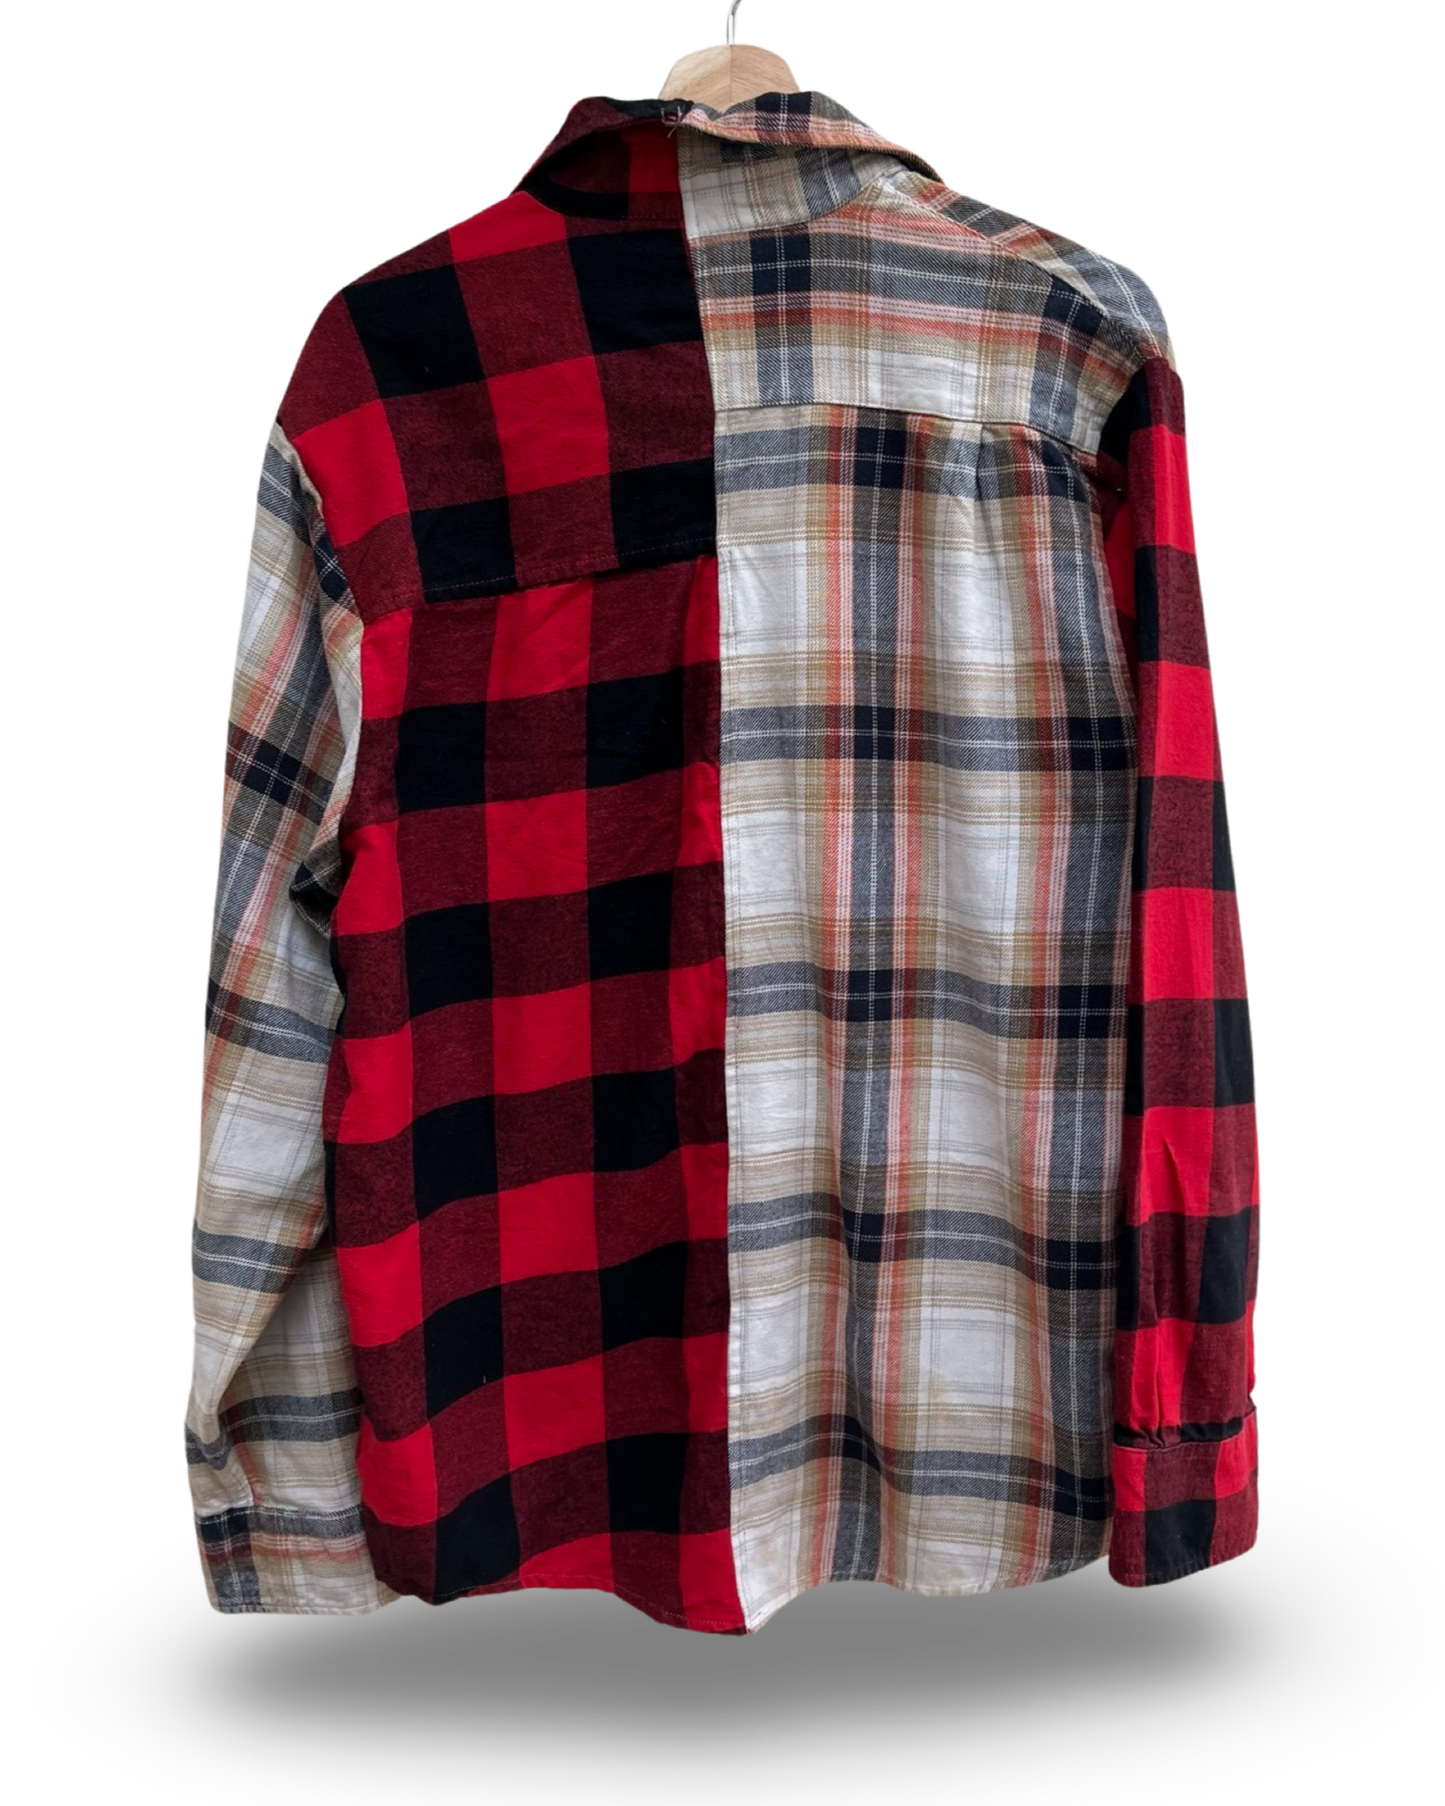 Red and neutral reworked check shirt